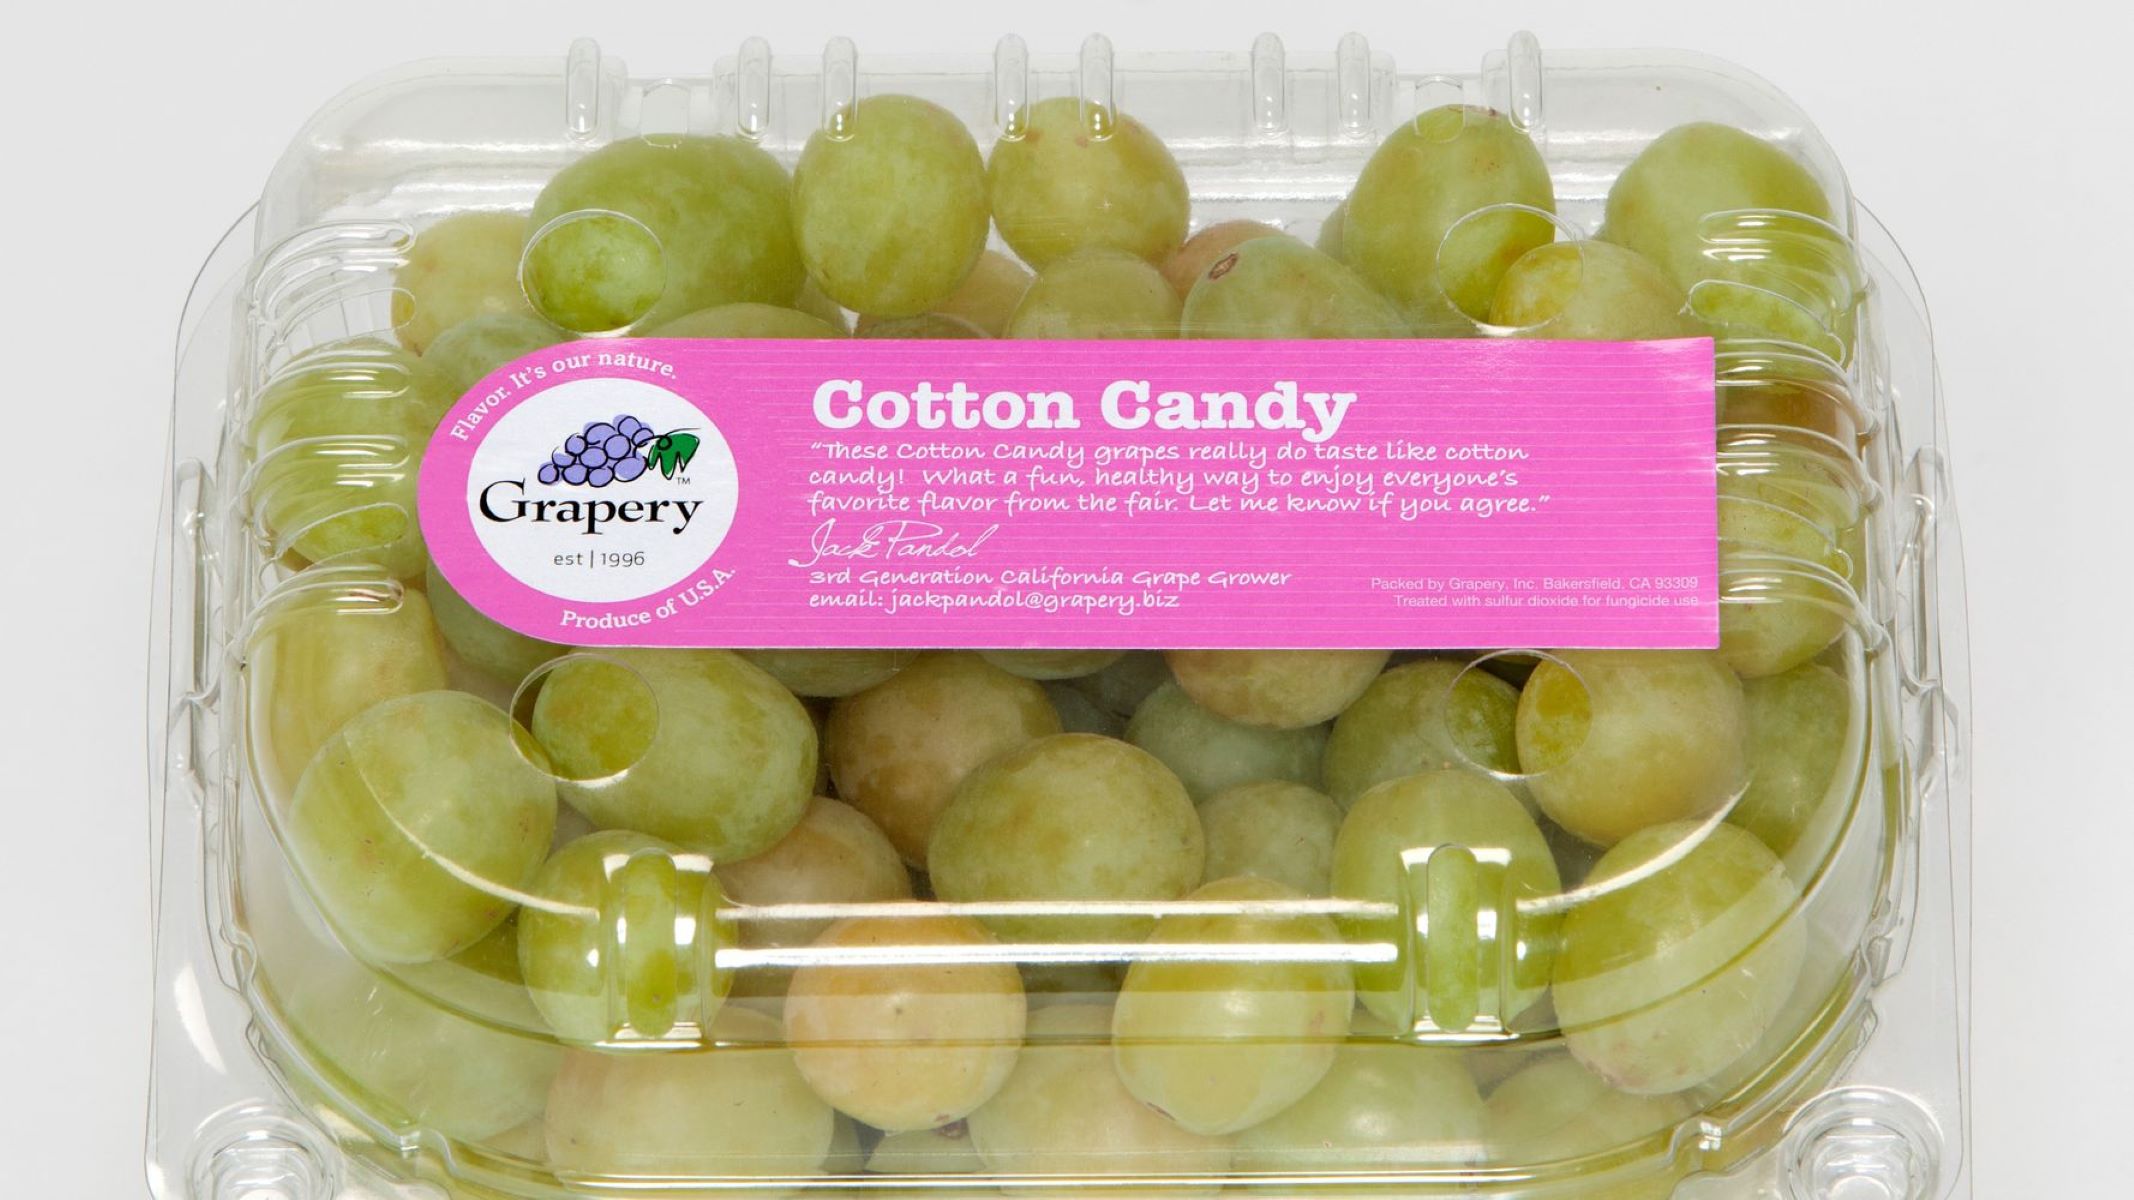 The Shocking Dangers Of Eating Cotton Candy Grapes: What You Need To Know